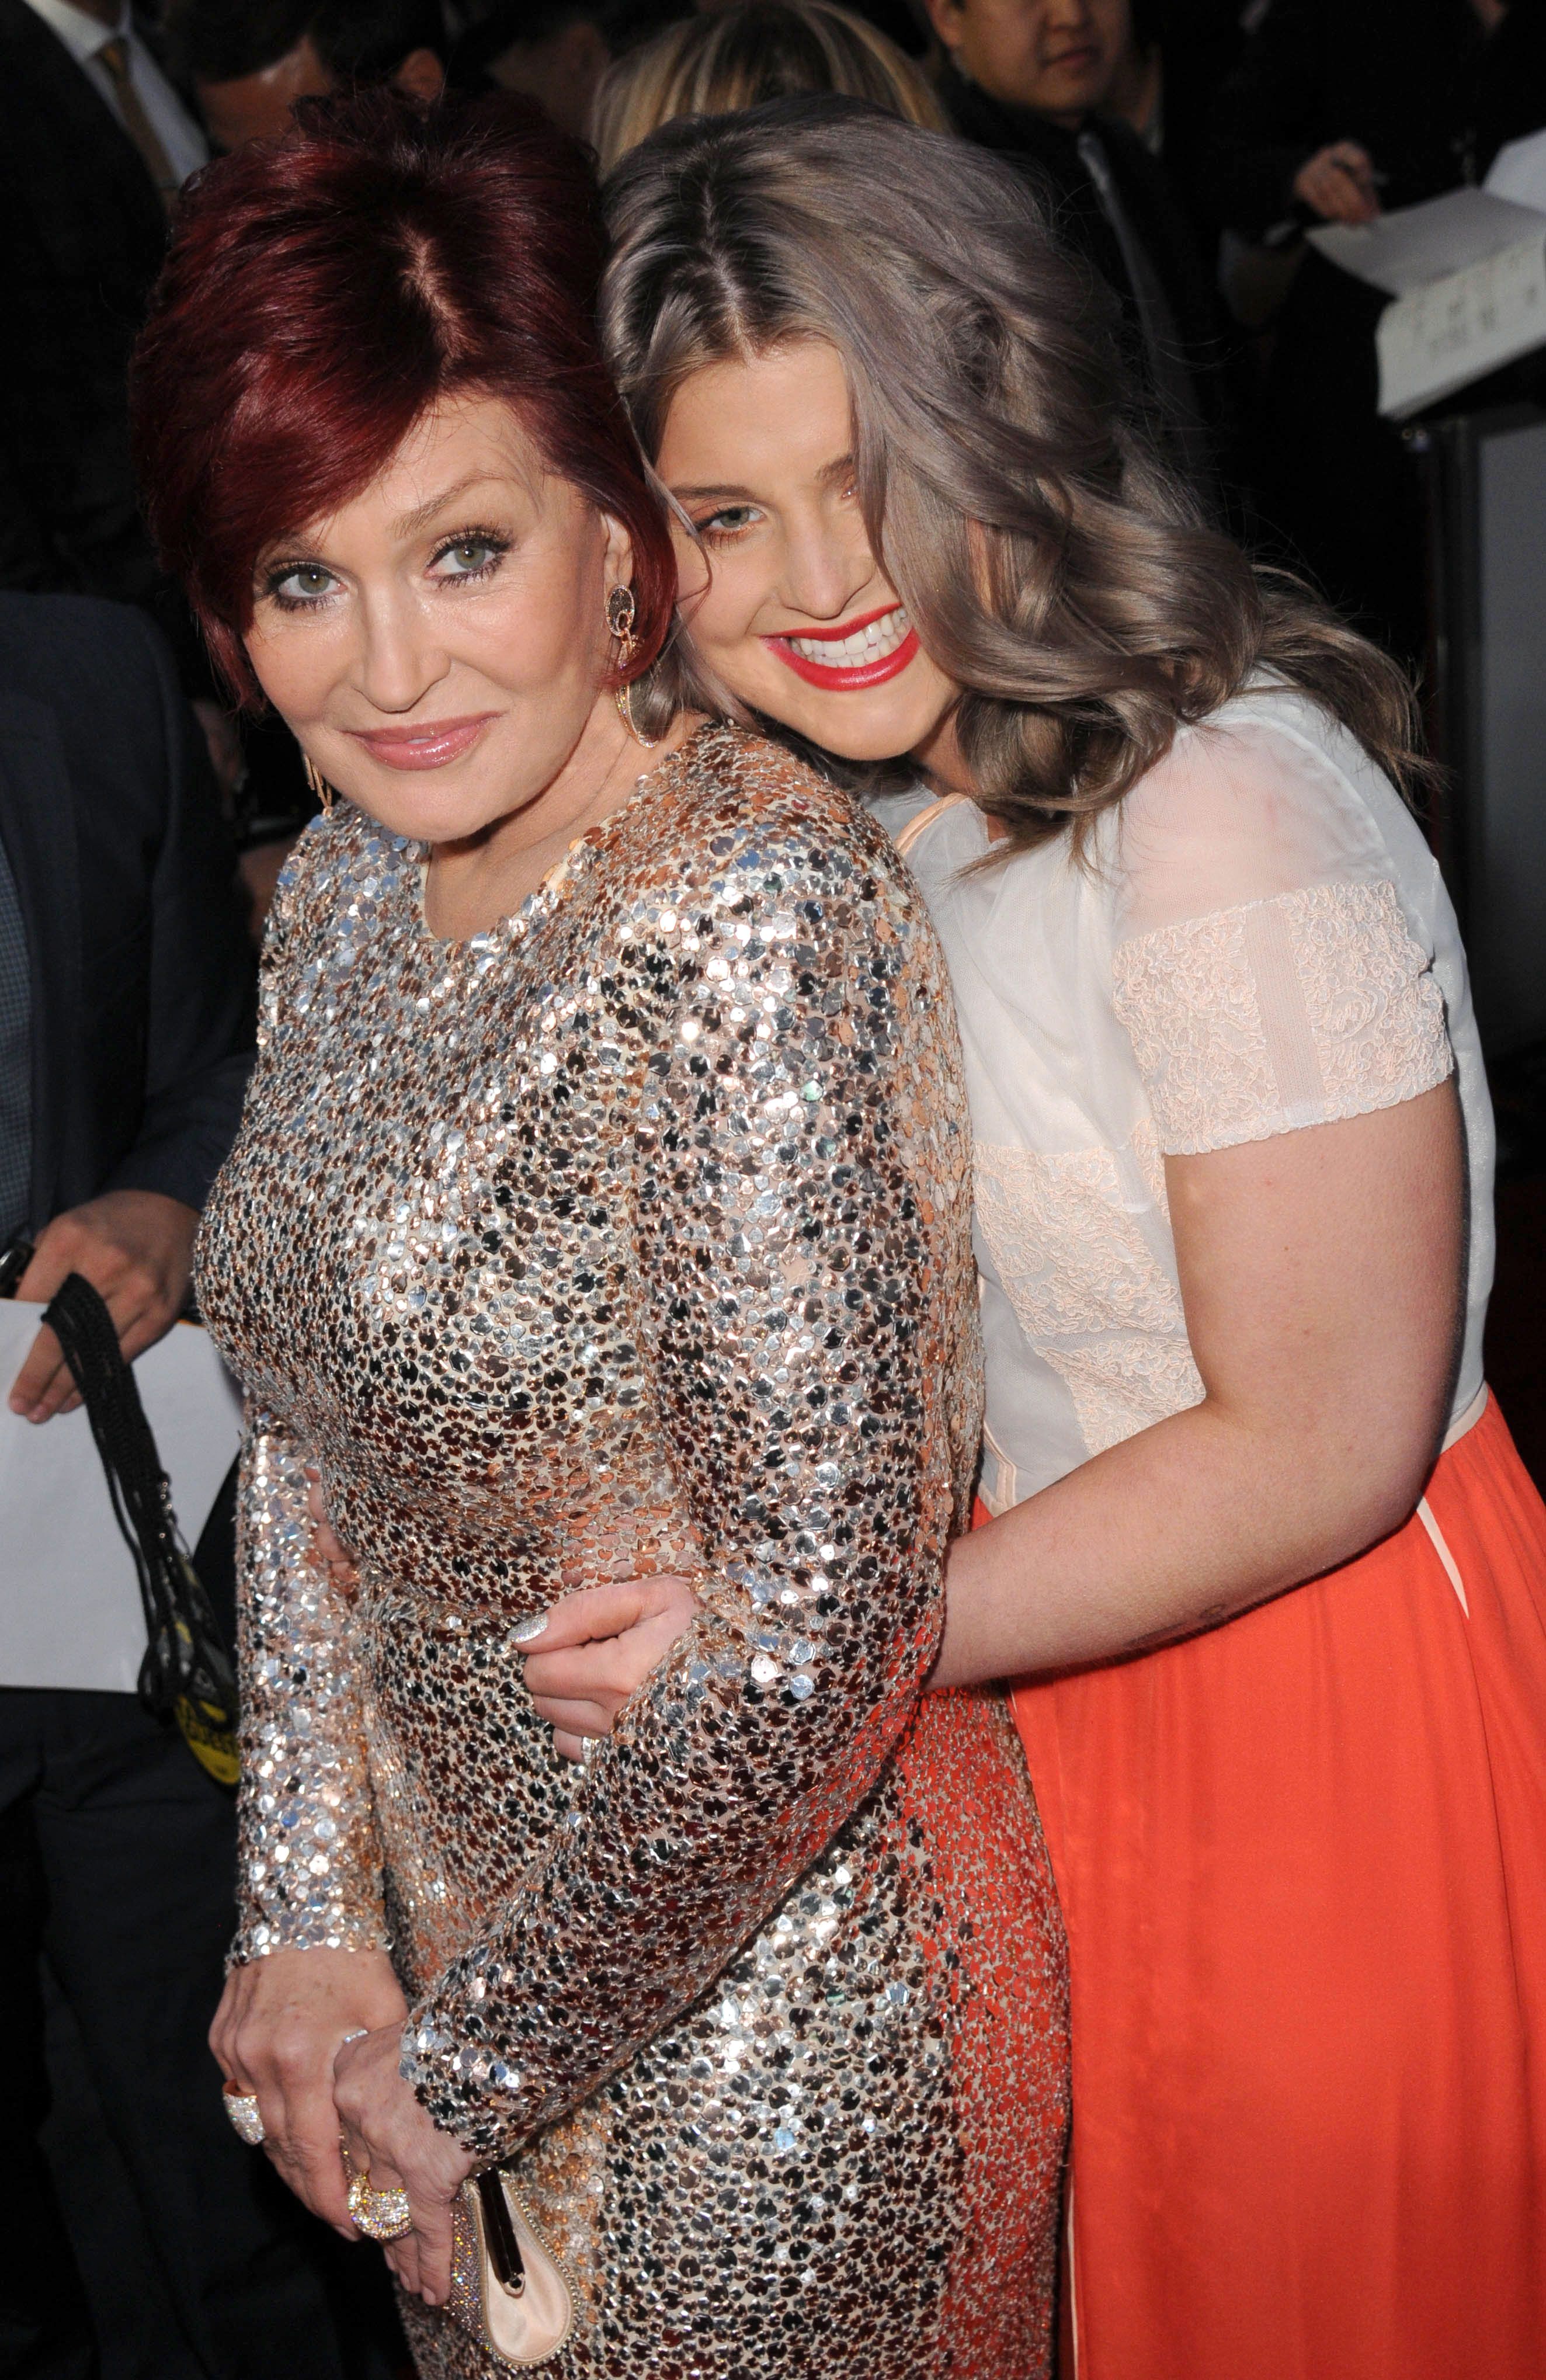 Sharon Osbourne and Kelly Osbourne during the 2012 People's Choice Awards at Nokia Theatre L.A. on January 11, 2012, in Los Angeles, California. | Source: Getty Images